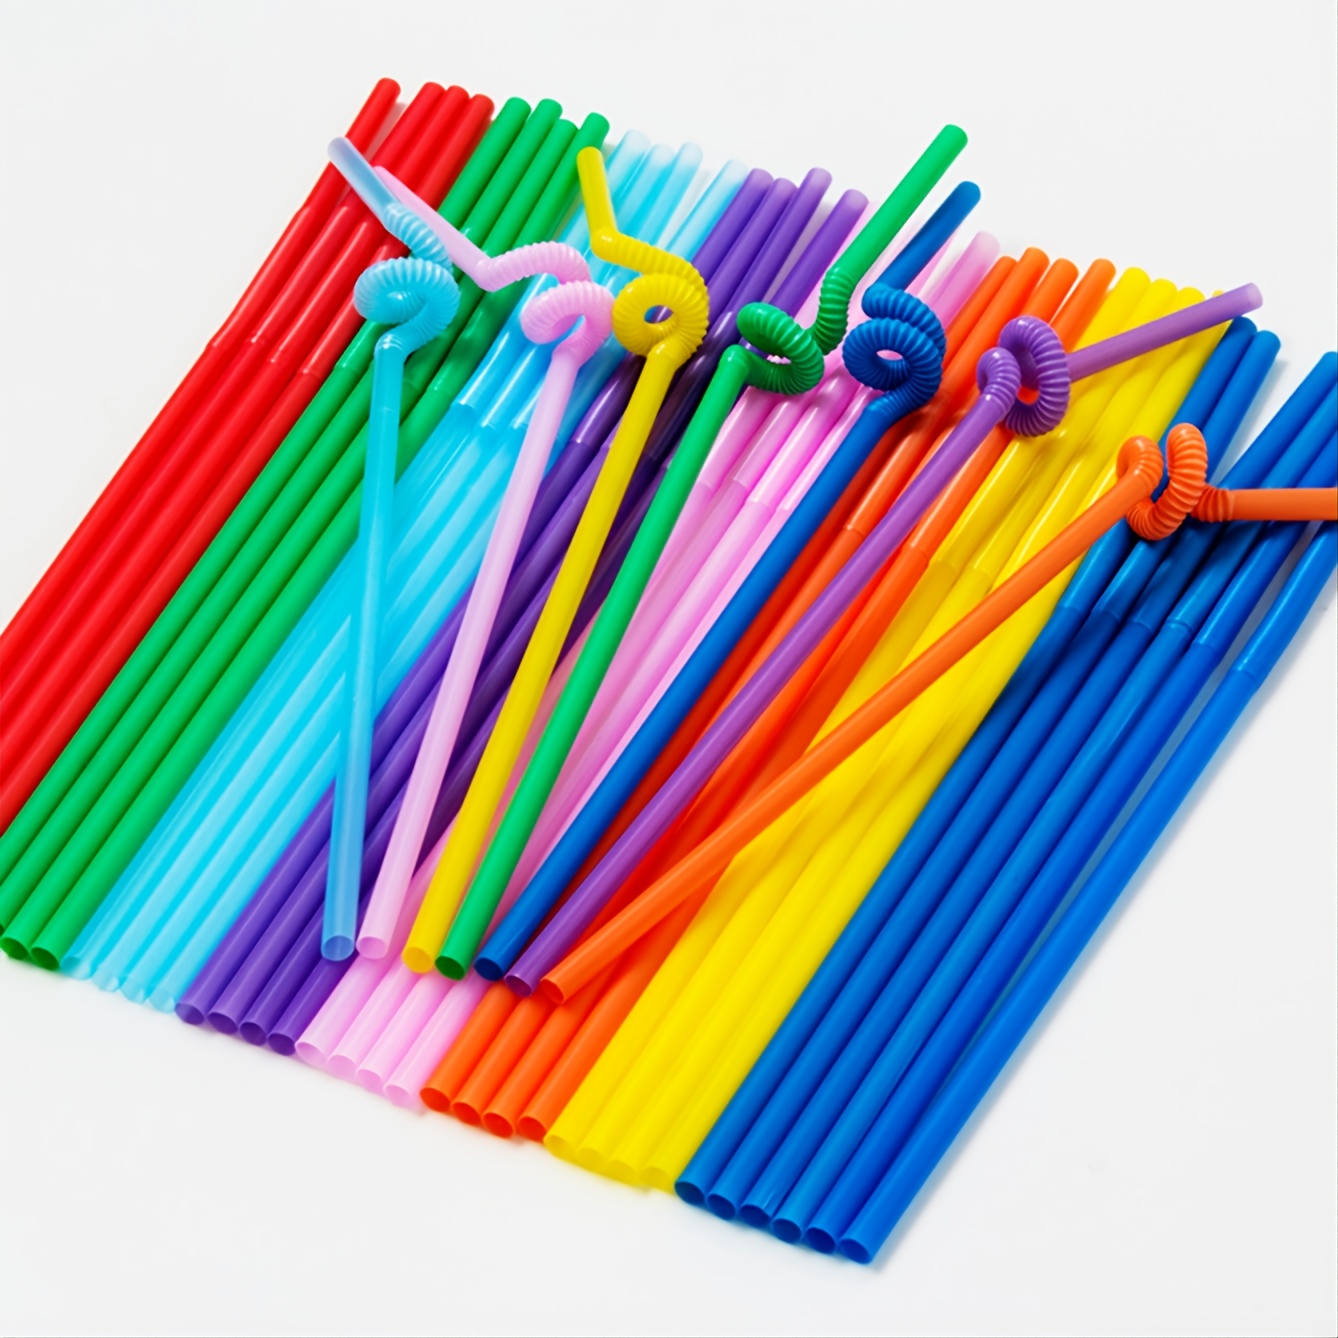 100pcs Disposable Colorful Drinking Straws at Lowest Price at Our Store